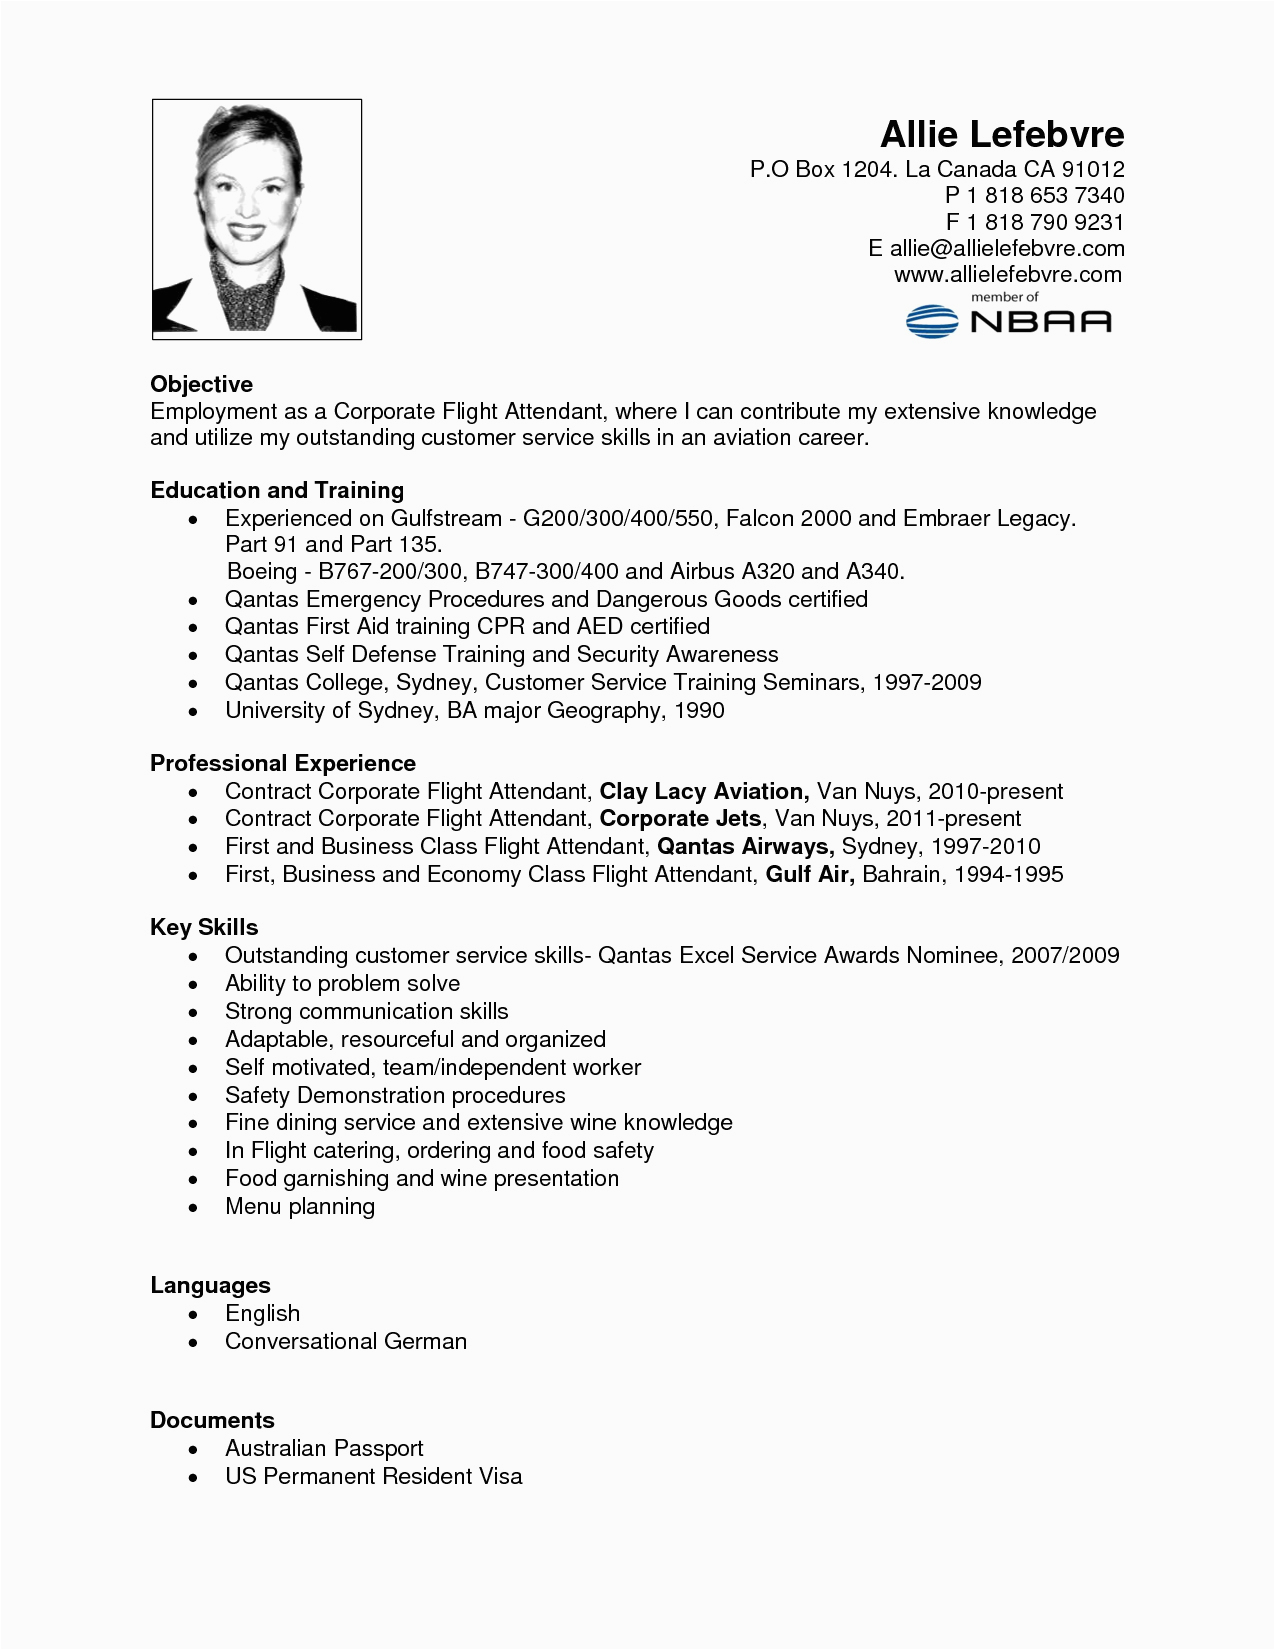 Sample Resume for Flight attendant with Experience Flight attendant Resume Sample